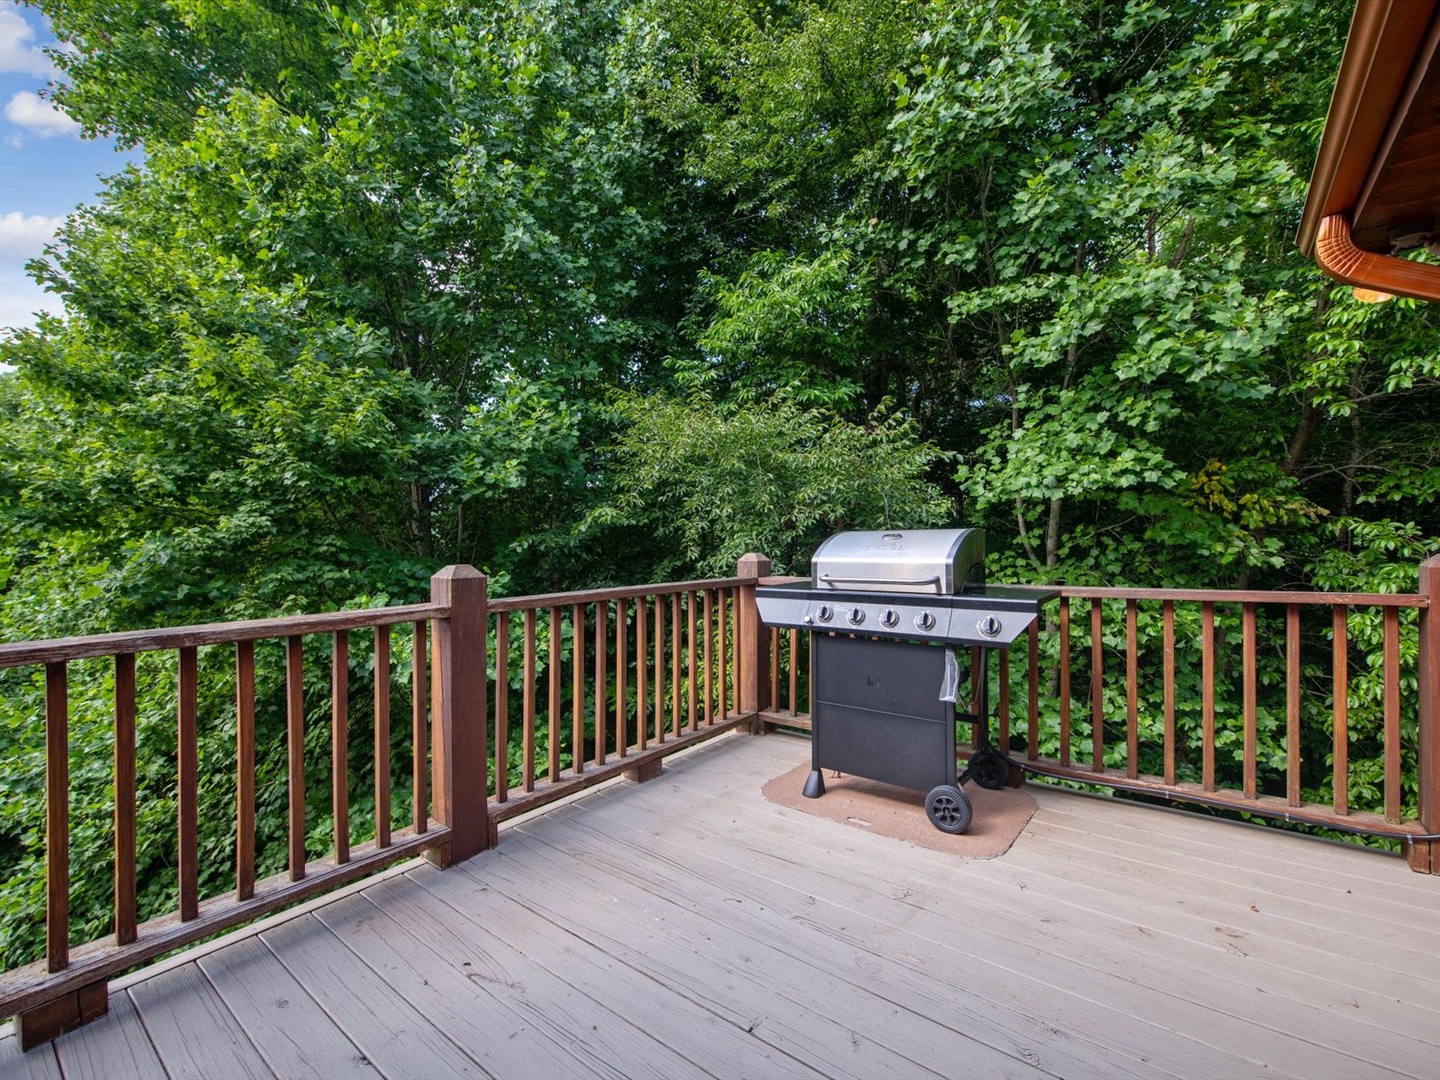 License 2 Chill - Entry Level Deck Grill